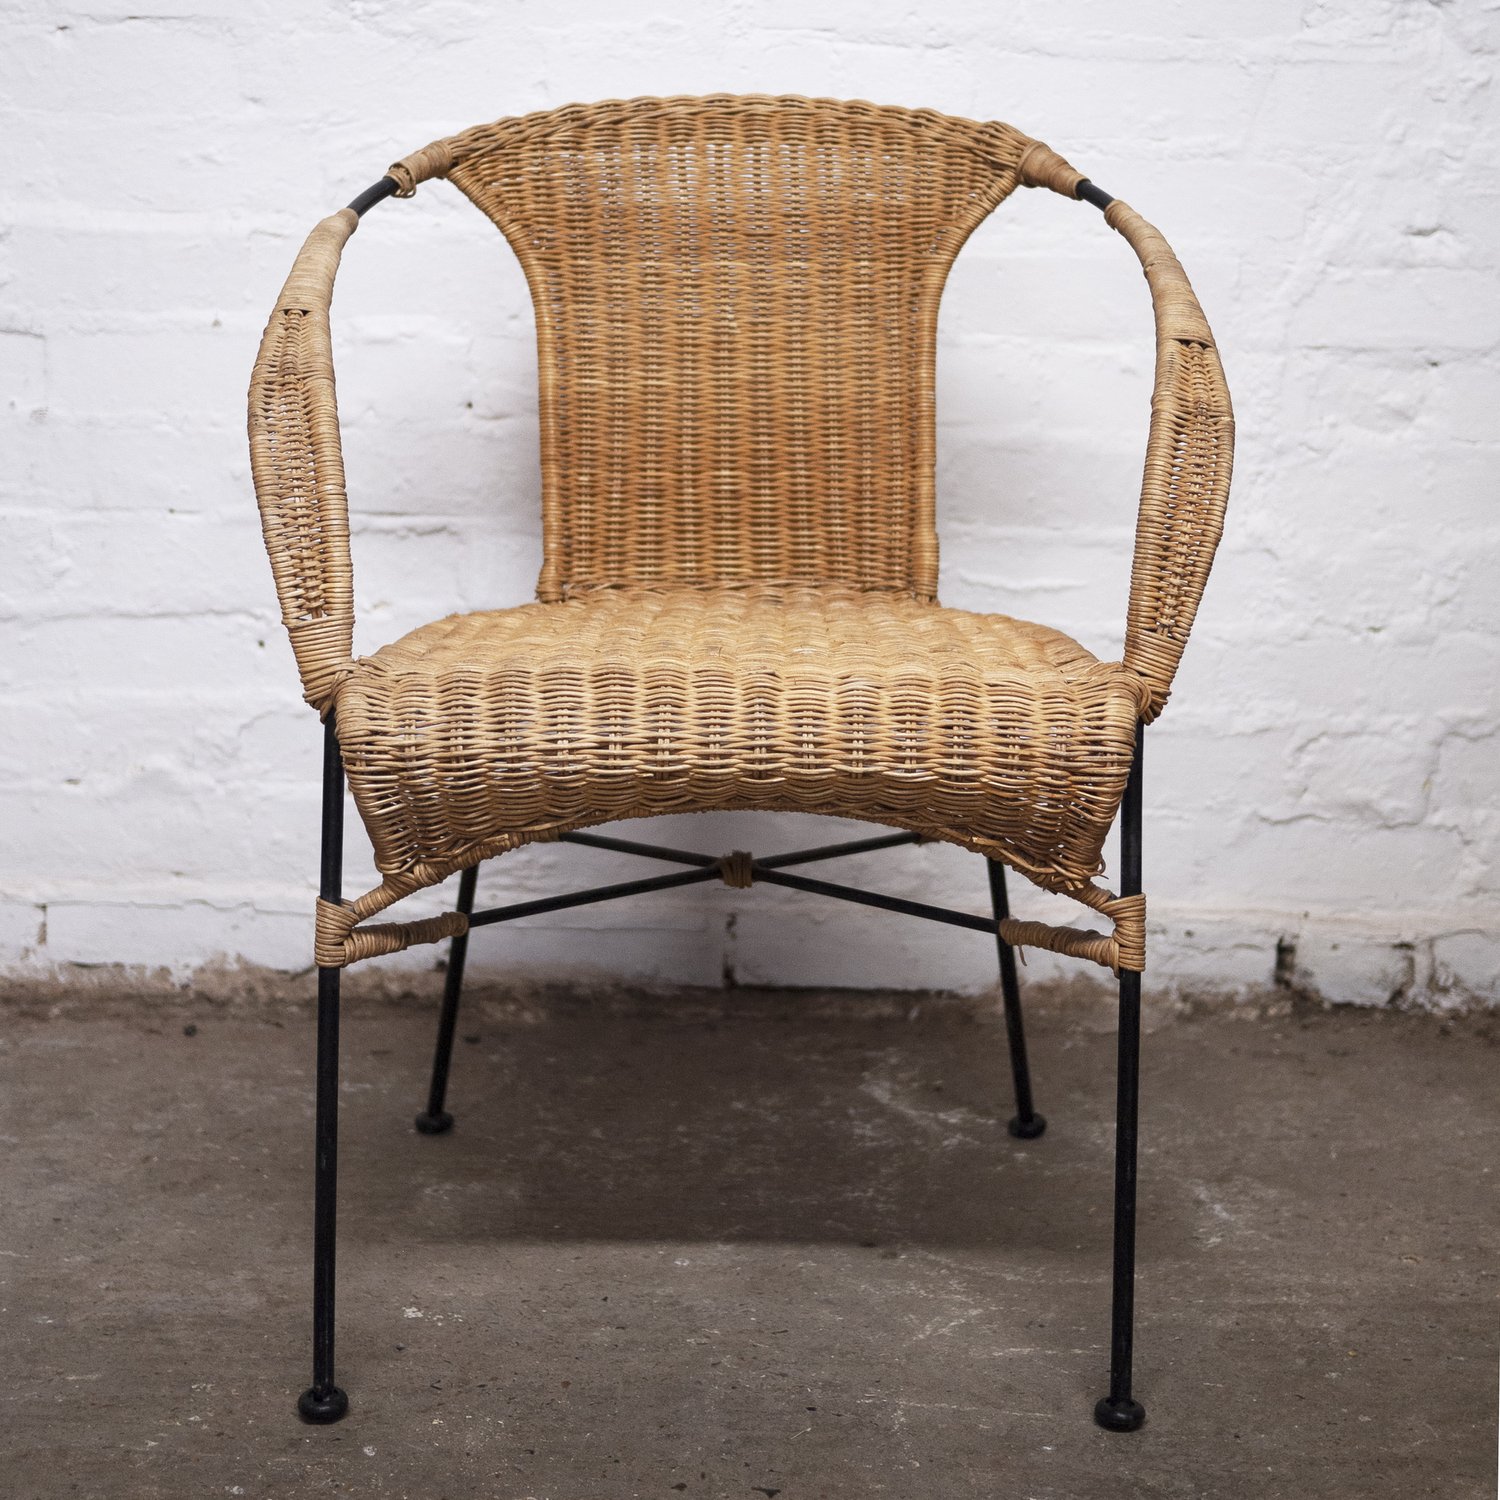 Vinatge Bamboo and Wicker Chair with Metal Legs, 1970s - Hunt Vintage